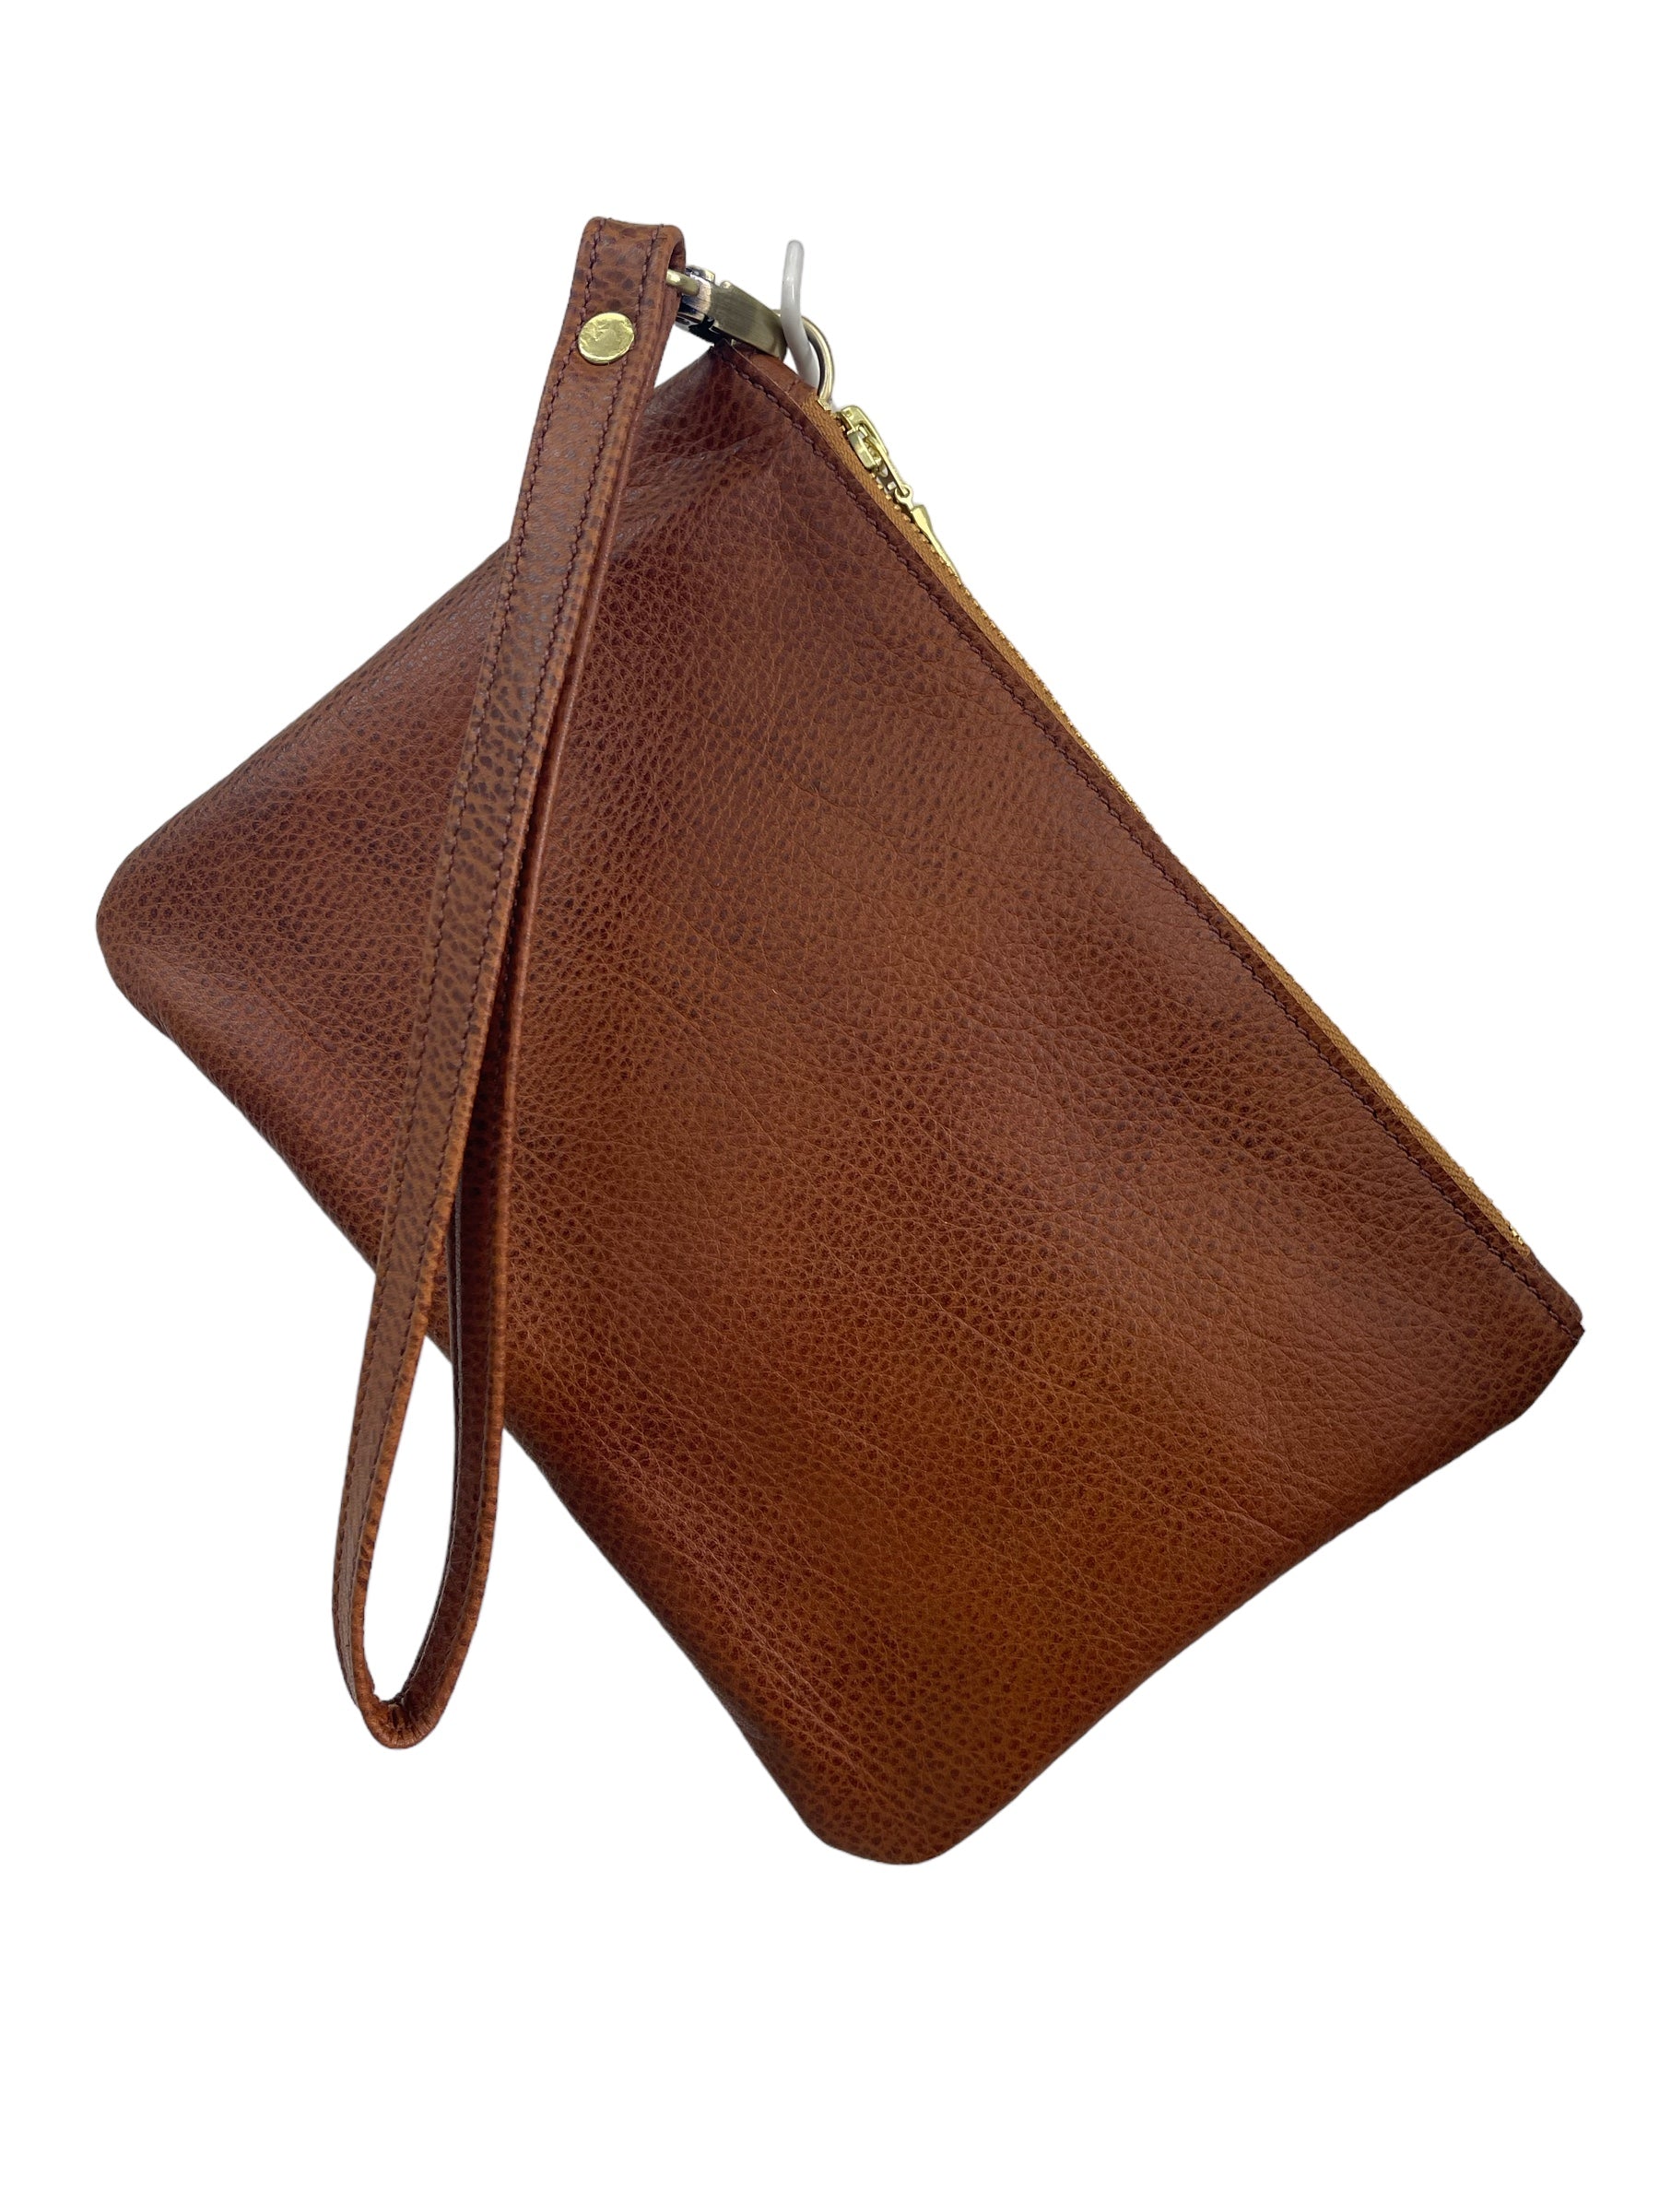 New Andover Clutch Dark Tan Leather #004